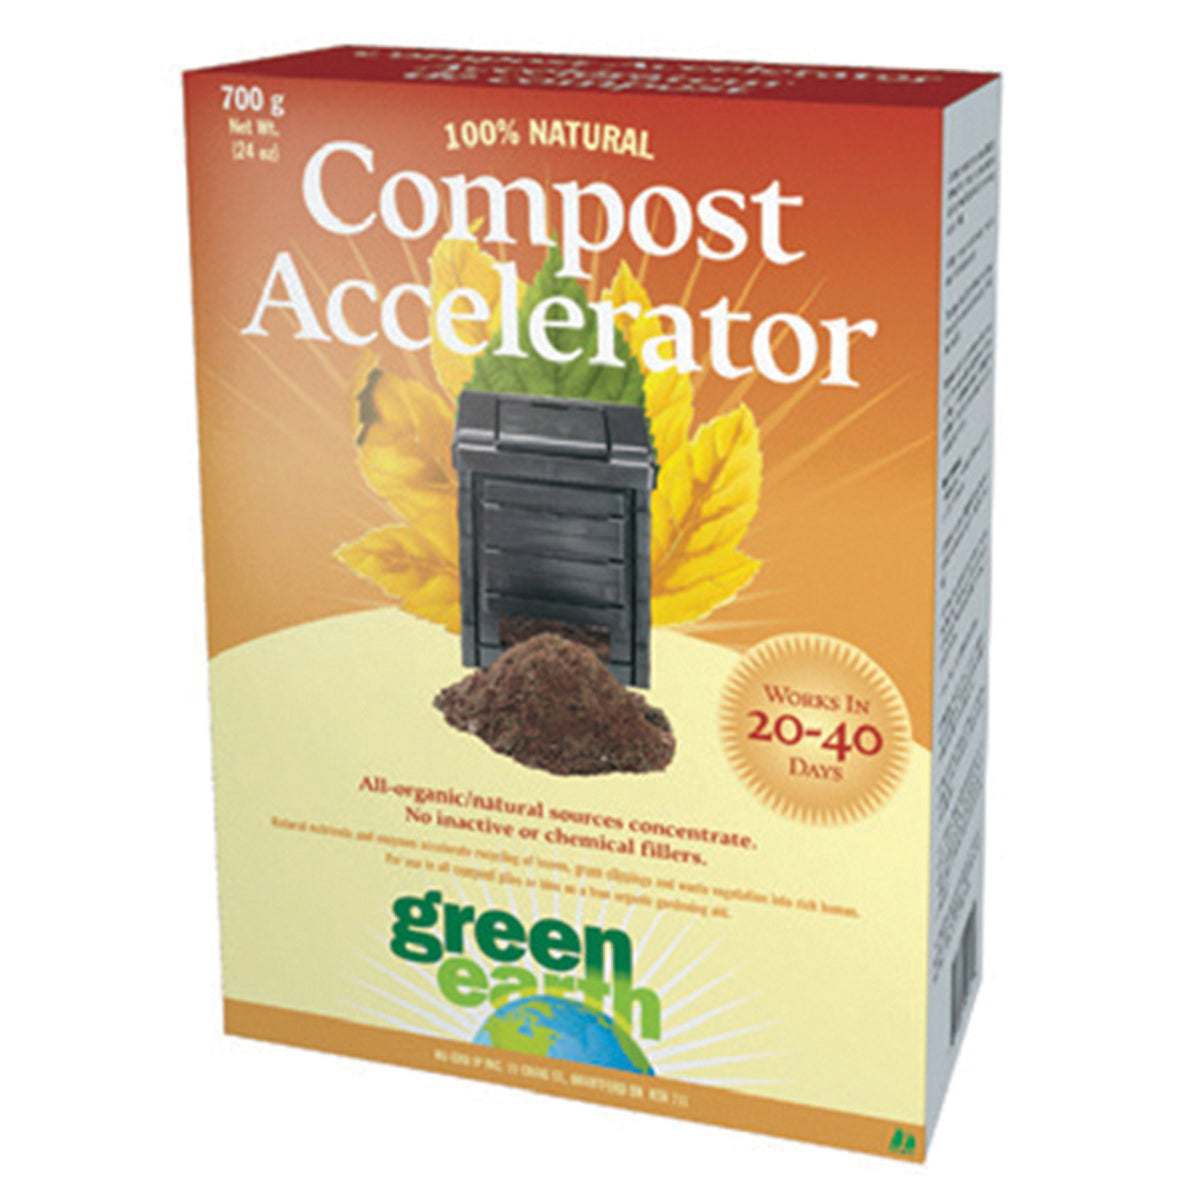 Green Earth Compost Accelerator 700g